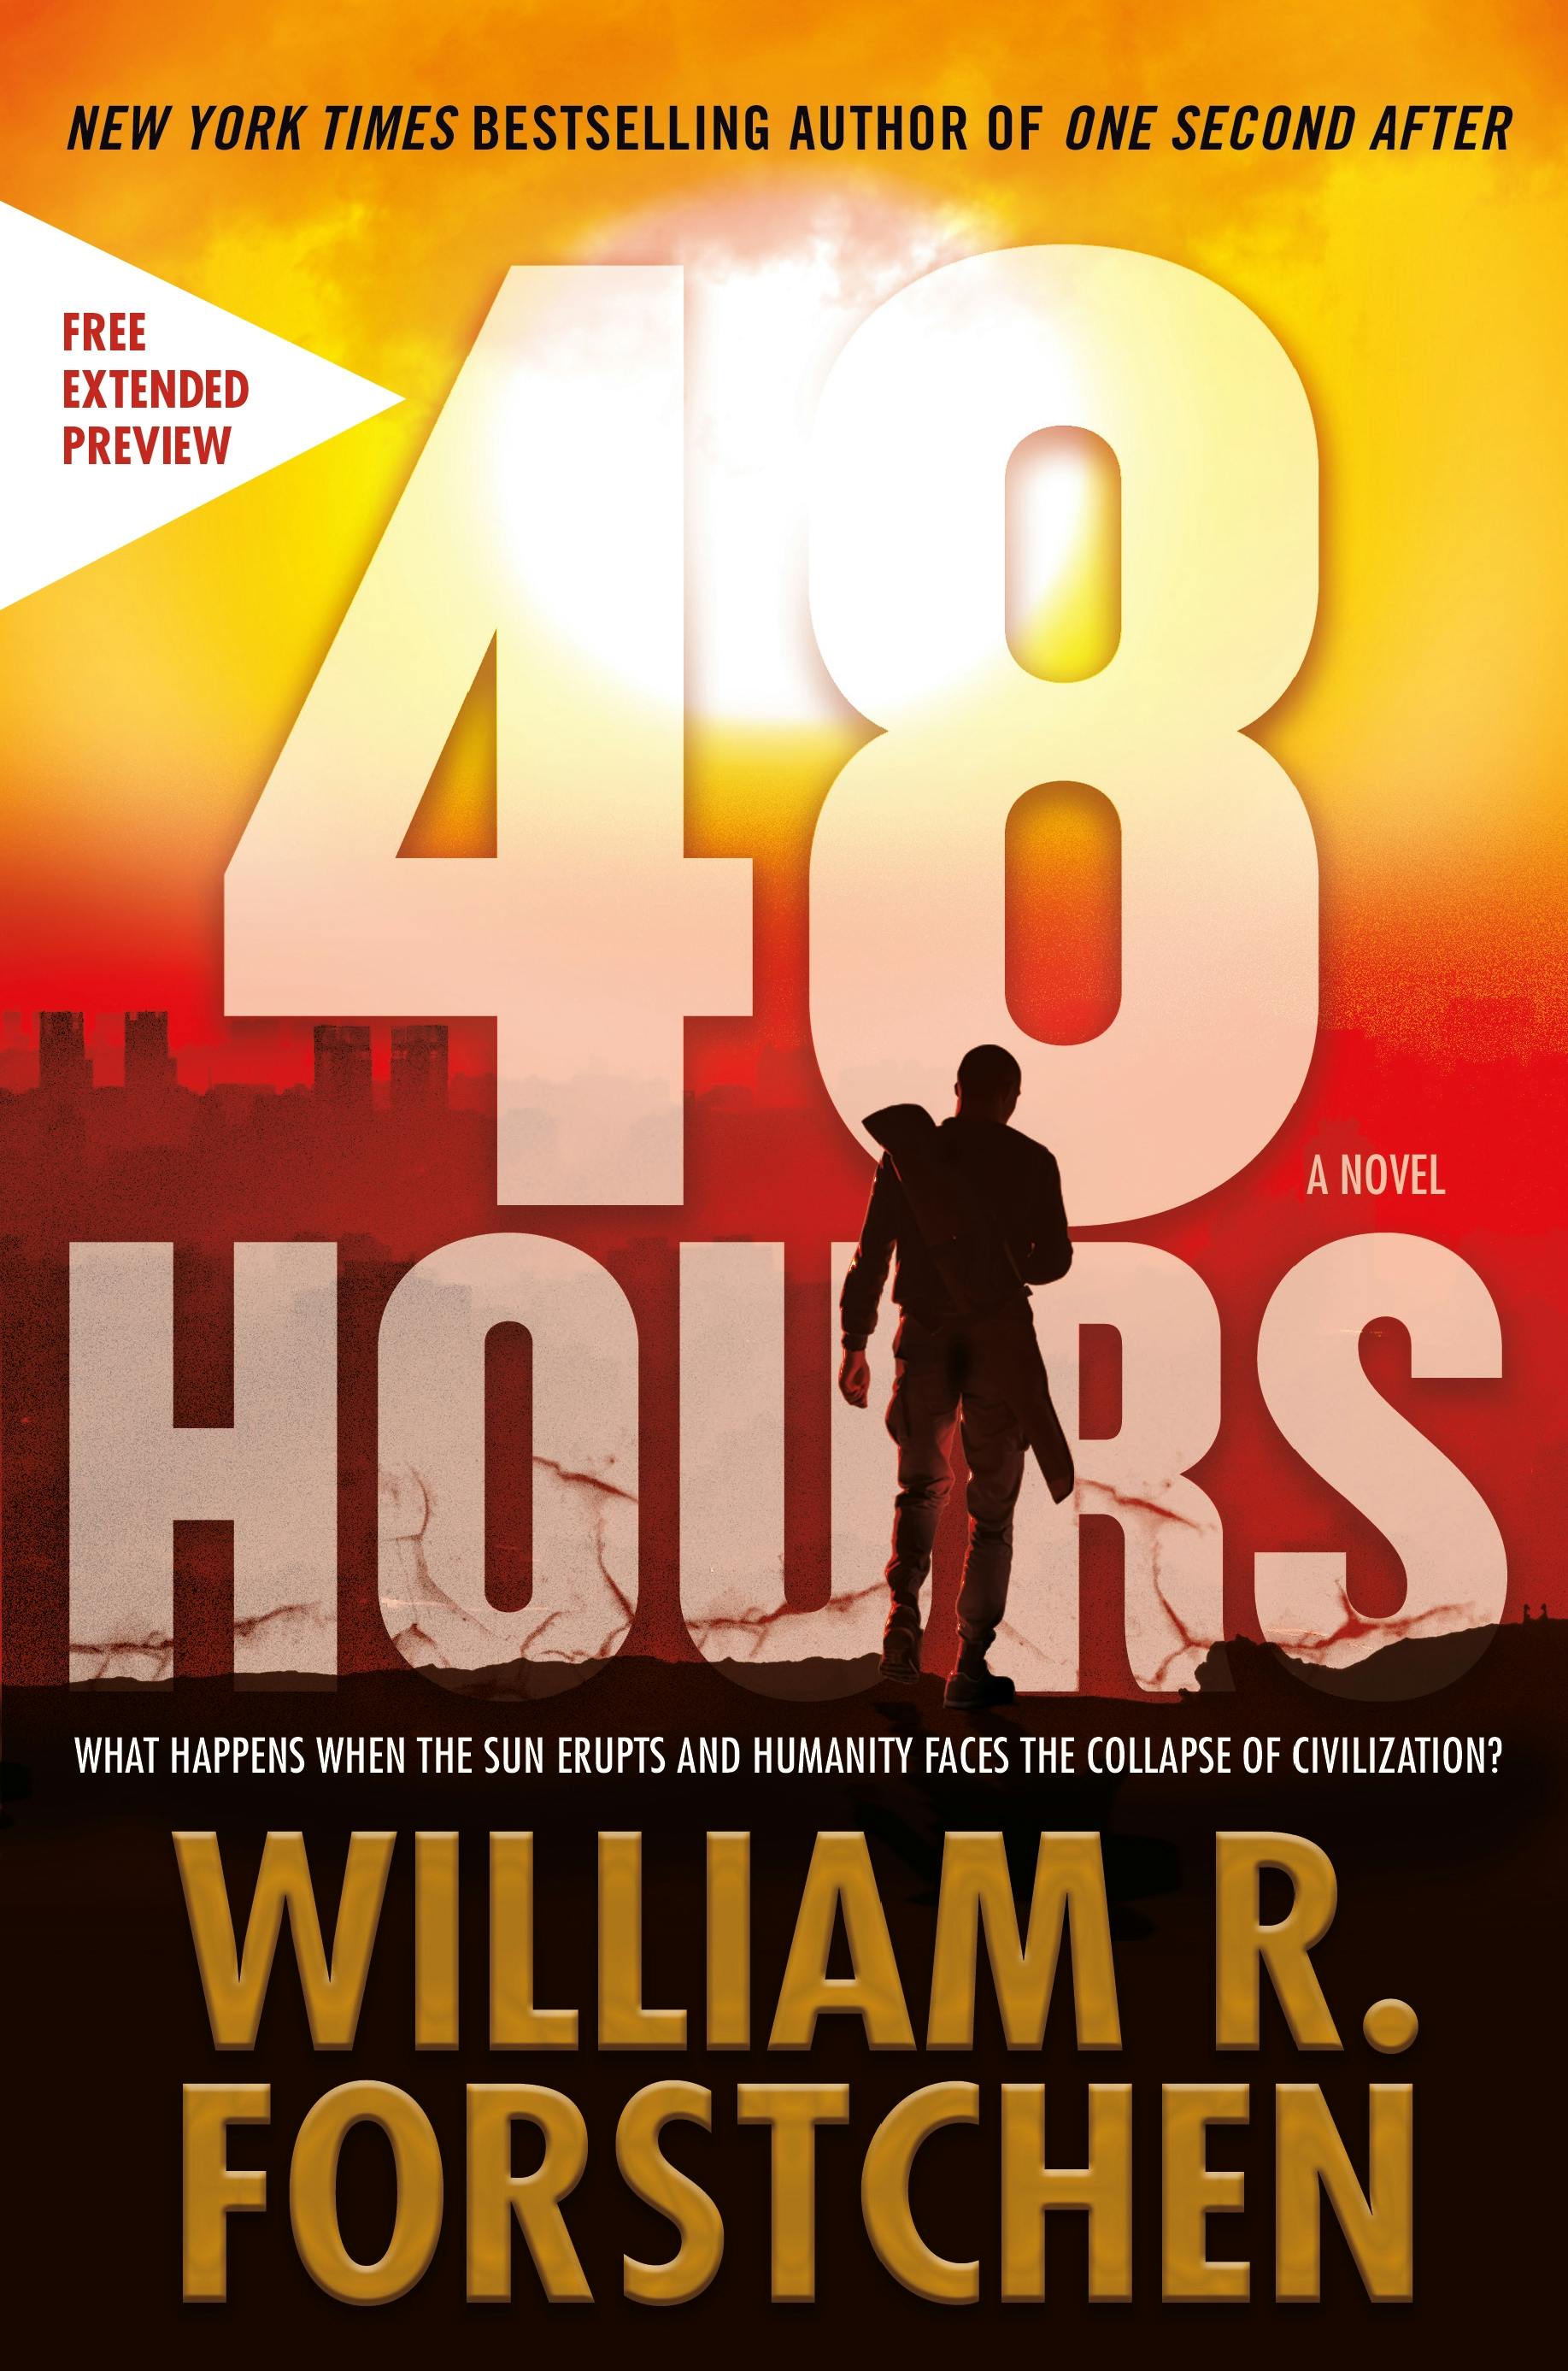 Cover for the book titled as: 48 Hours Sneak Peek